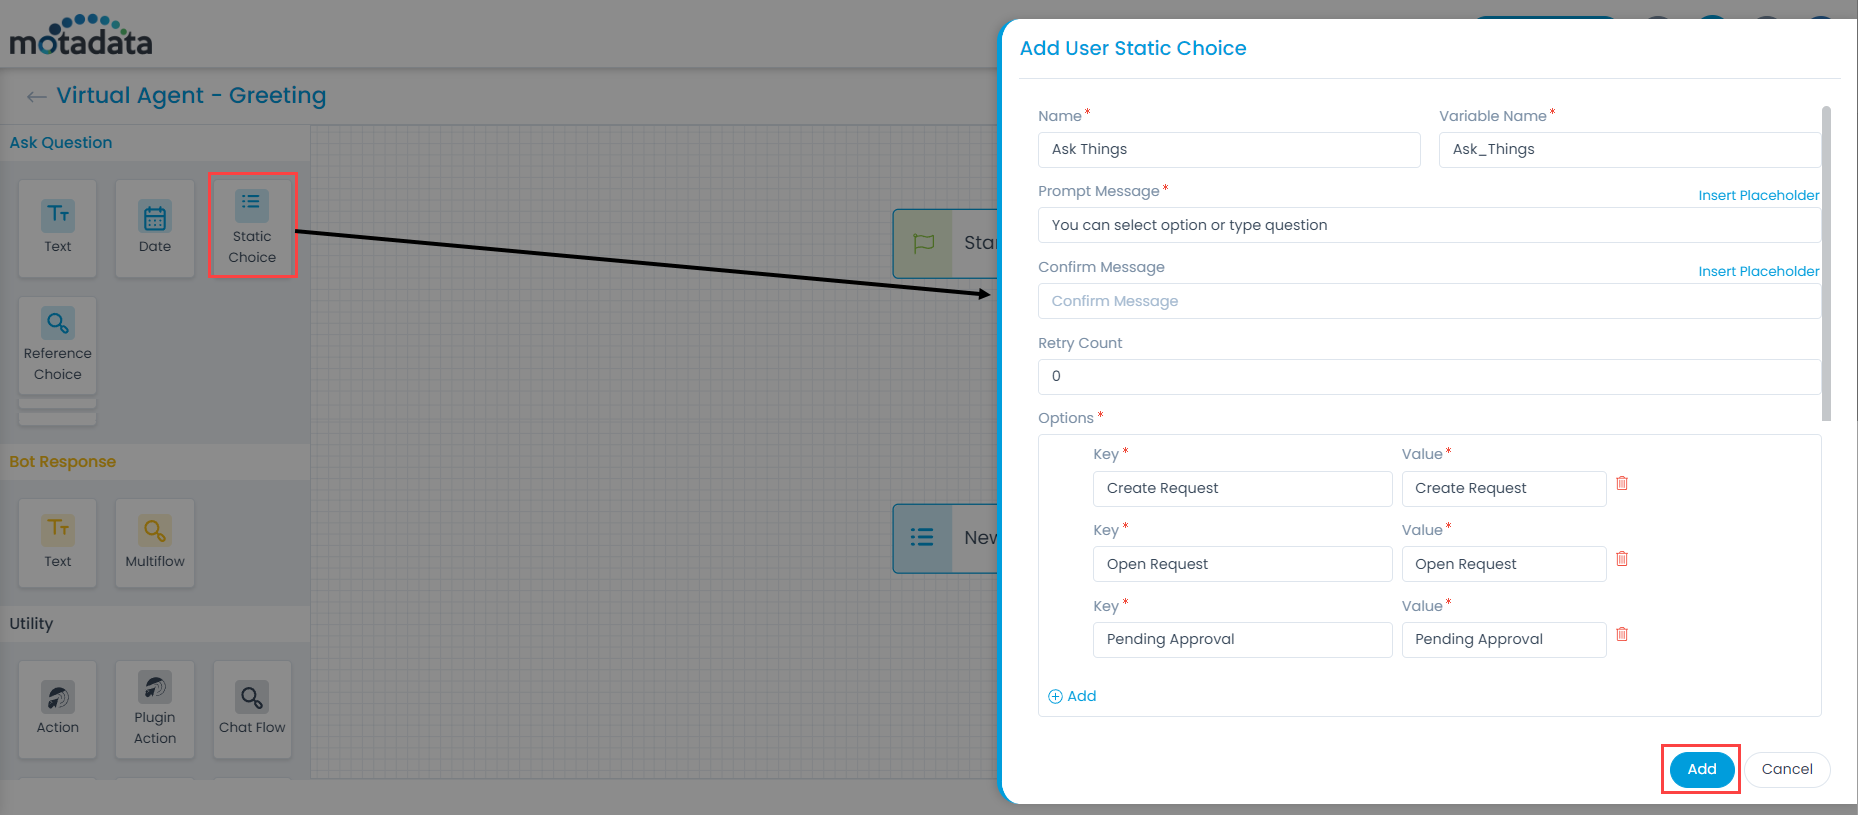 Adding Static Choice Field to the Chat Flow